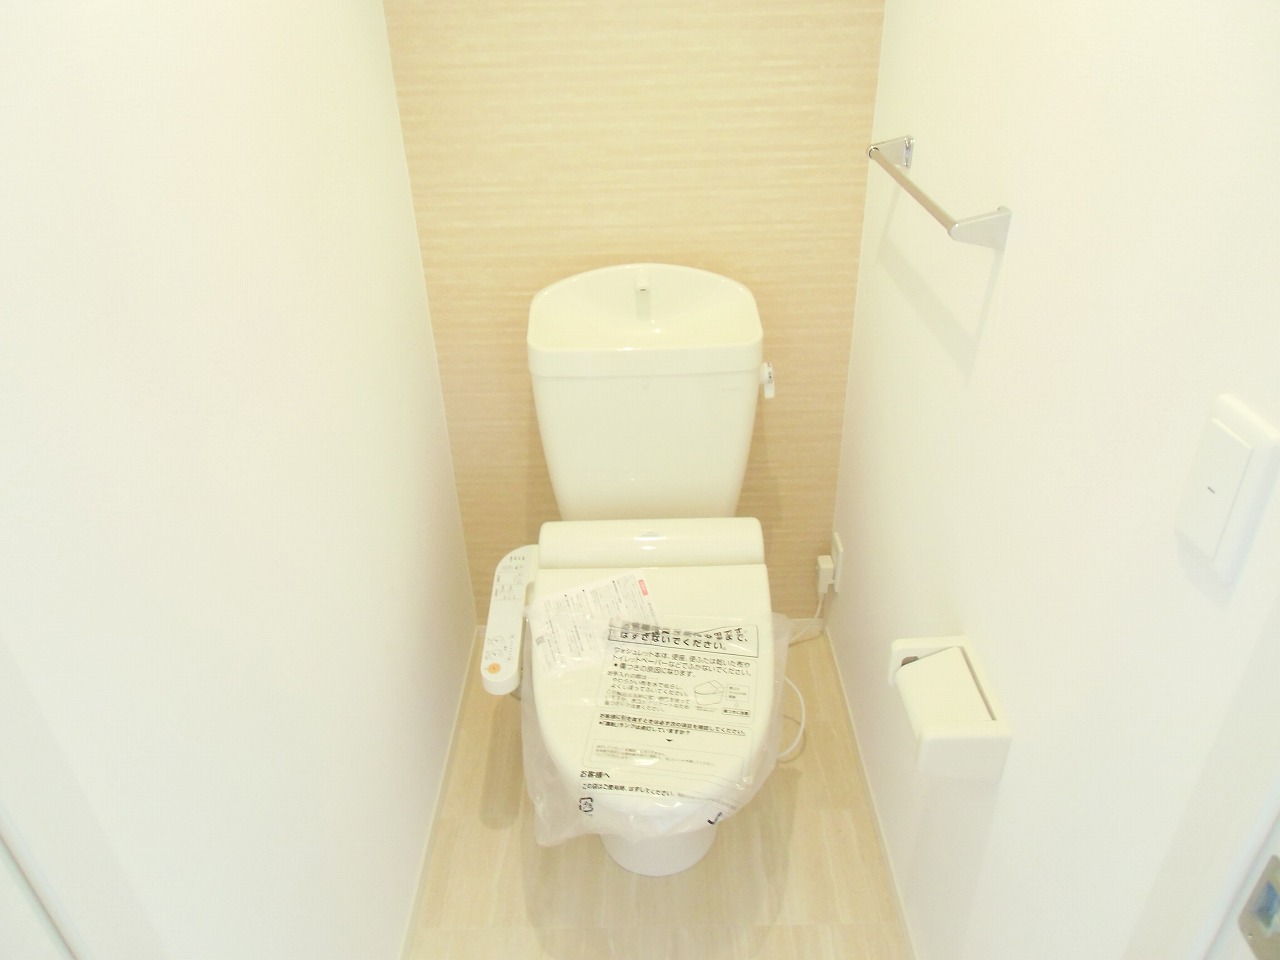 Toilet. It is similar to Listing